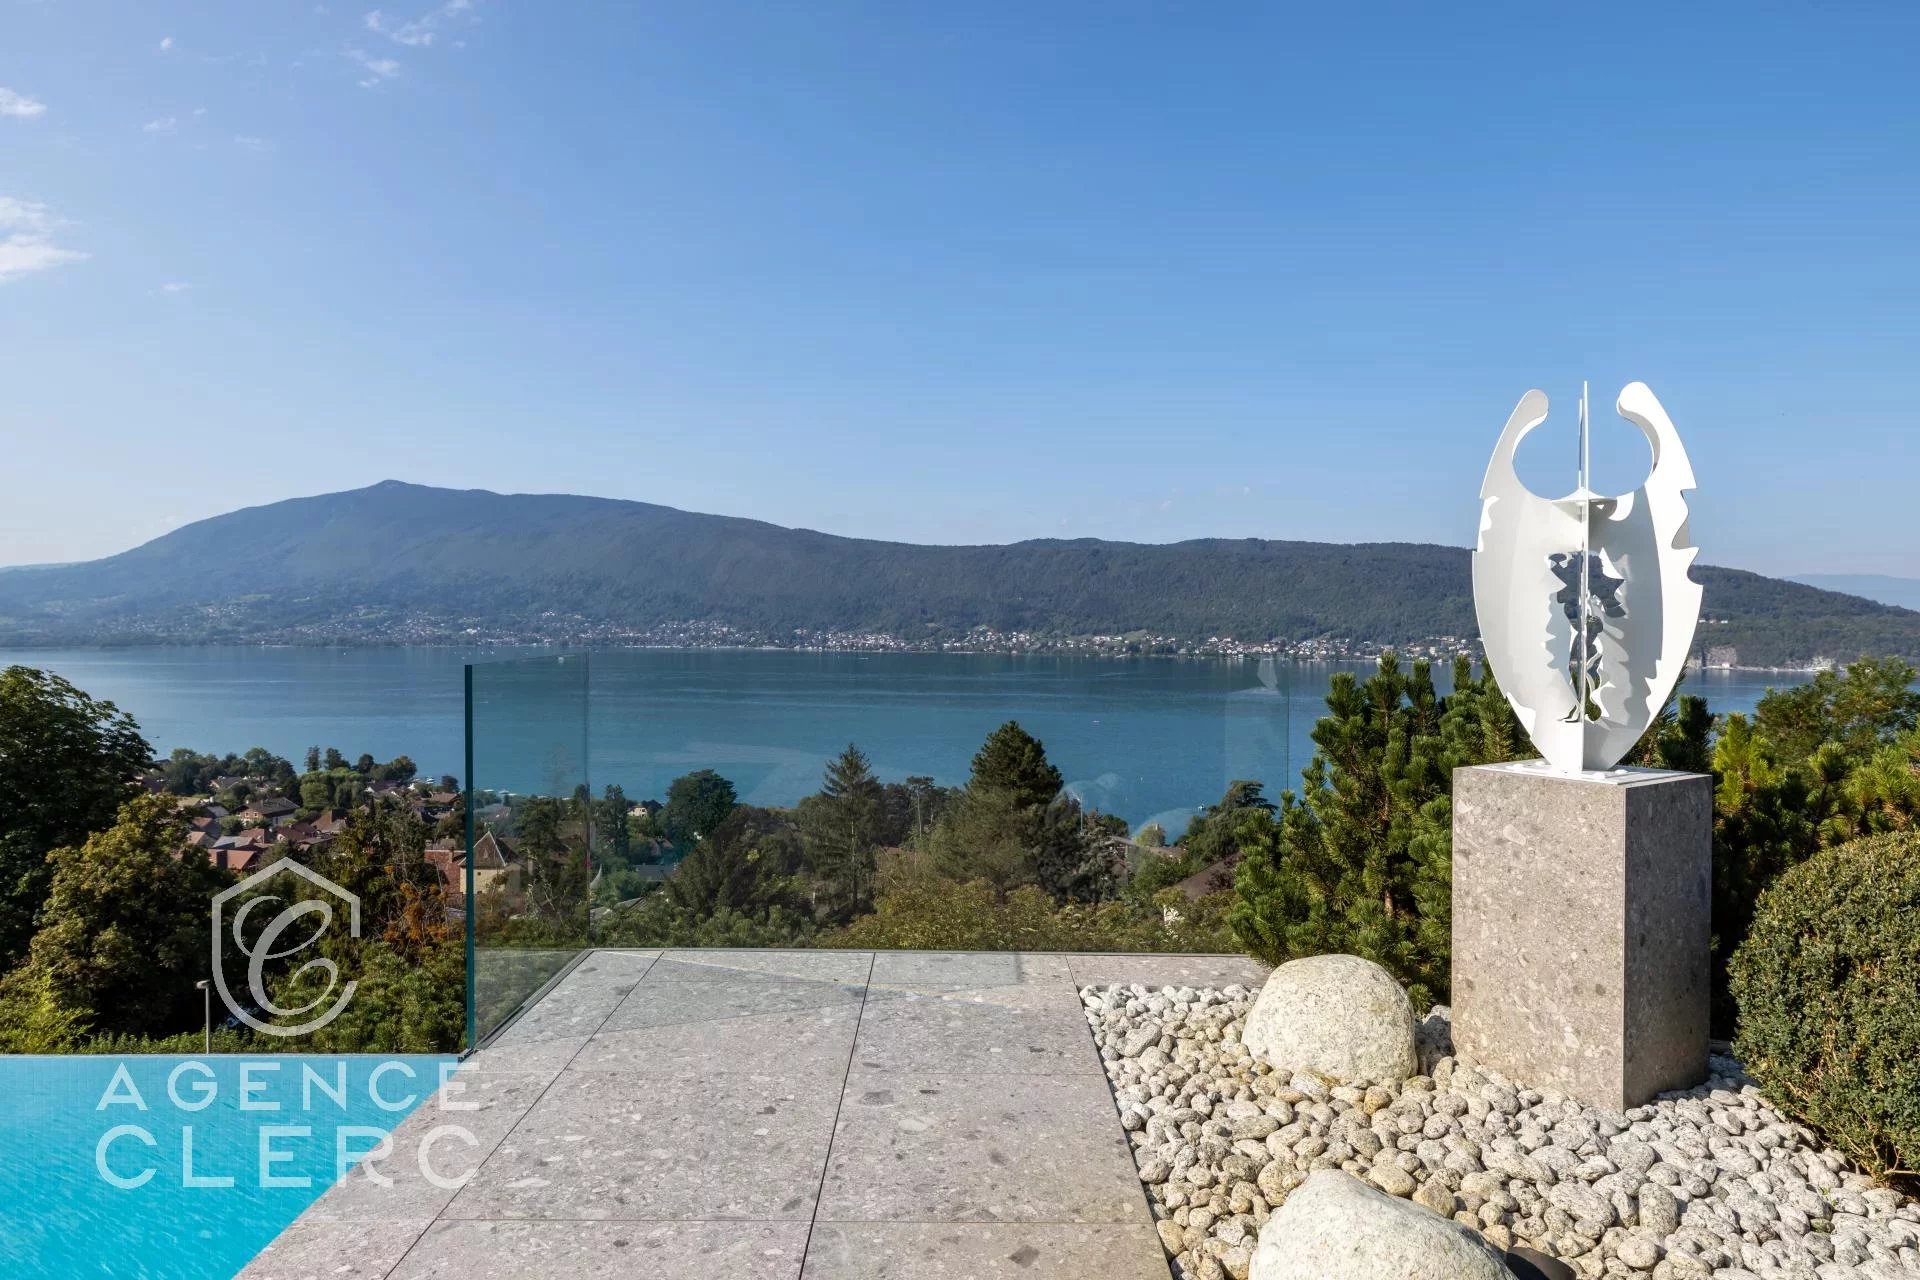 Veyrier du lac, property with panoramic view of the lake_3100